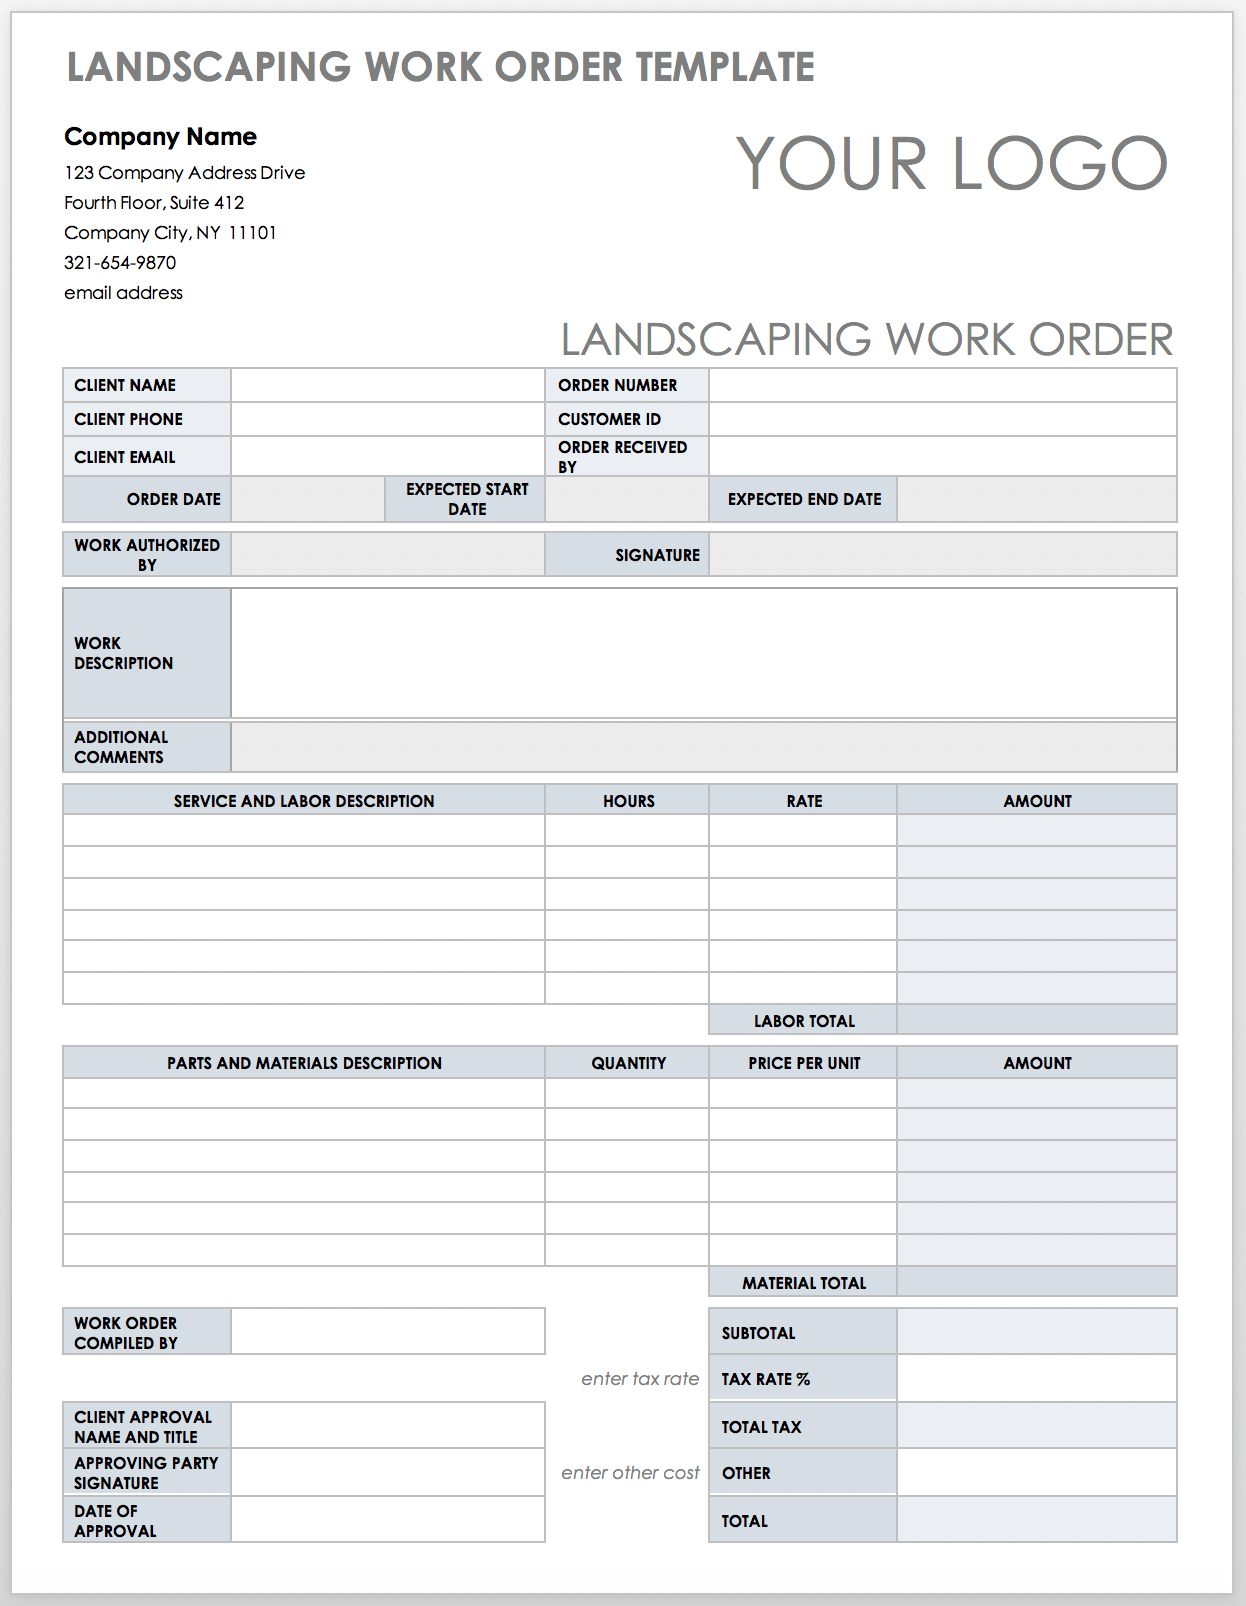 Landscaping Work Order Template